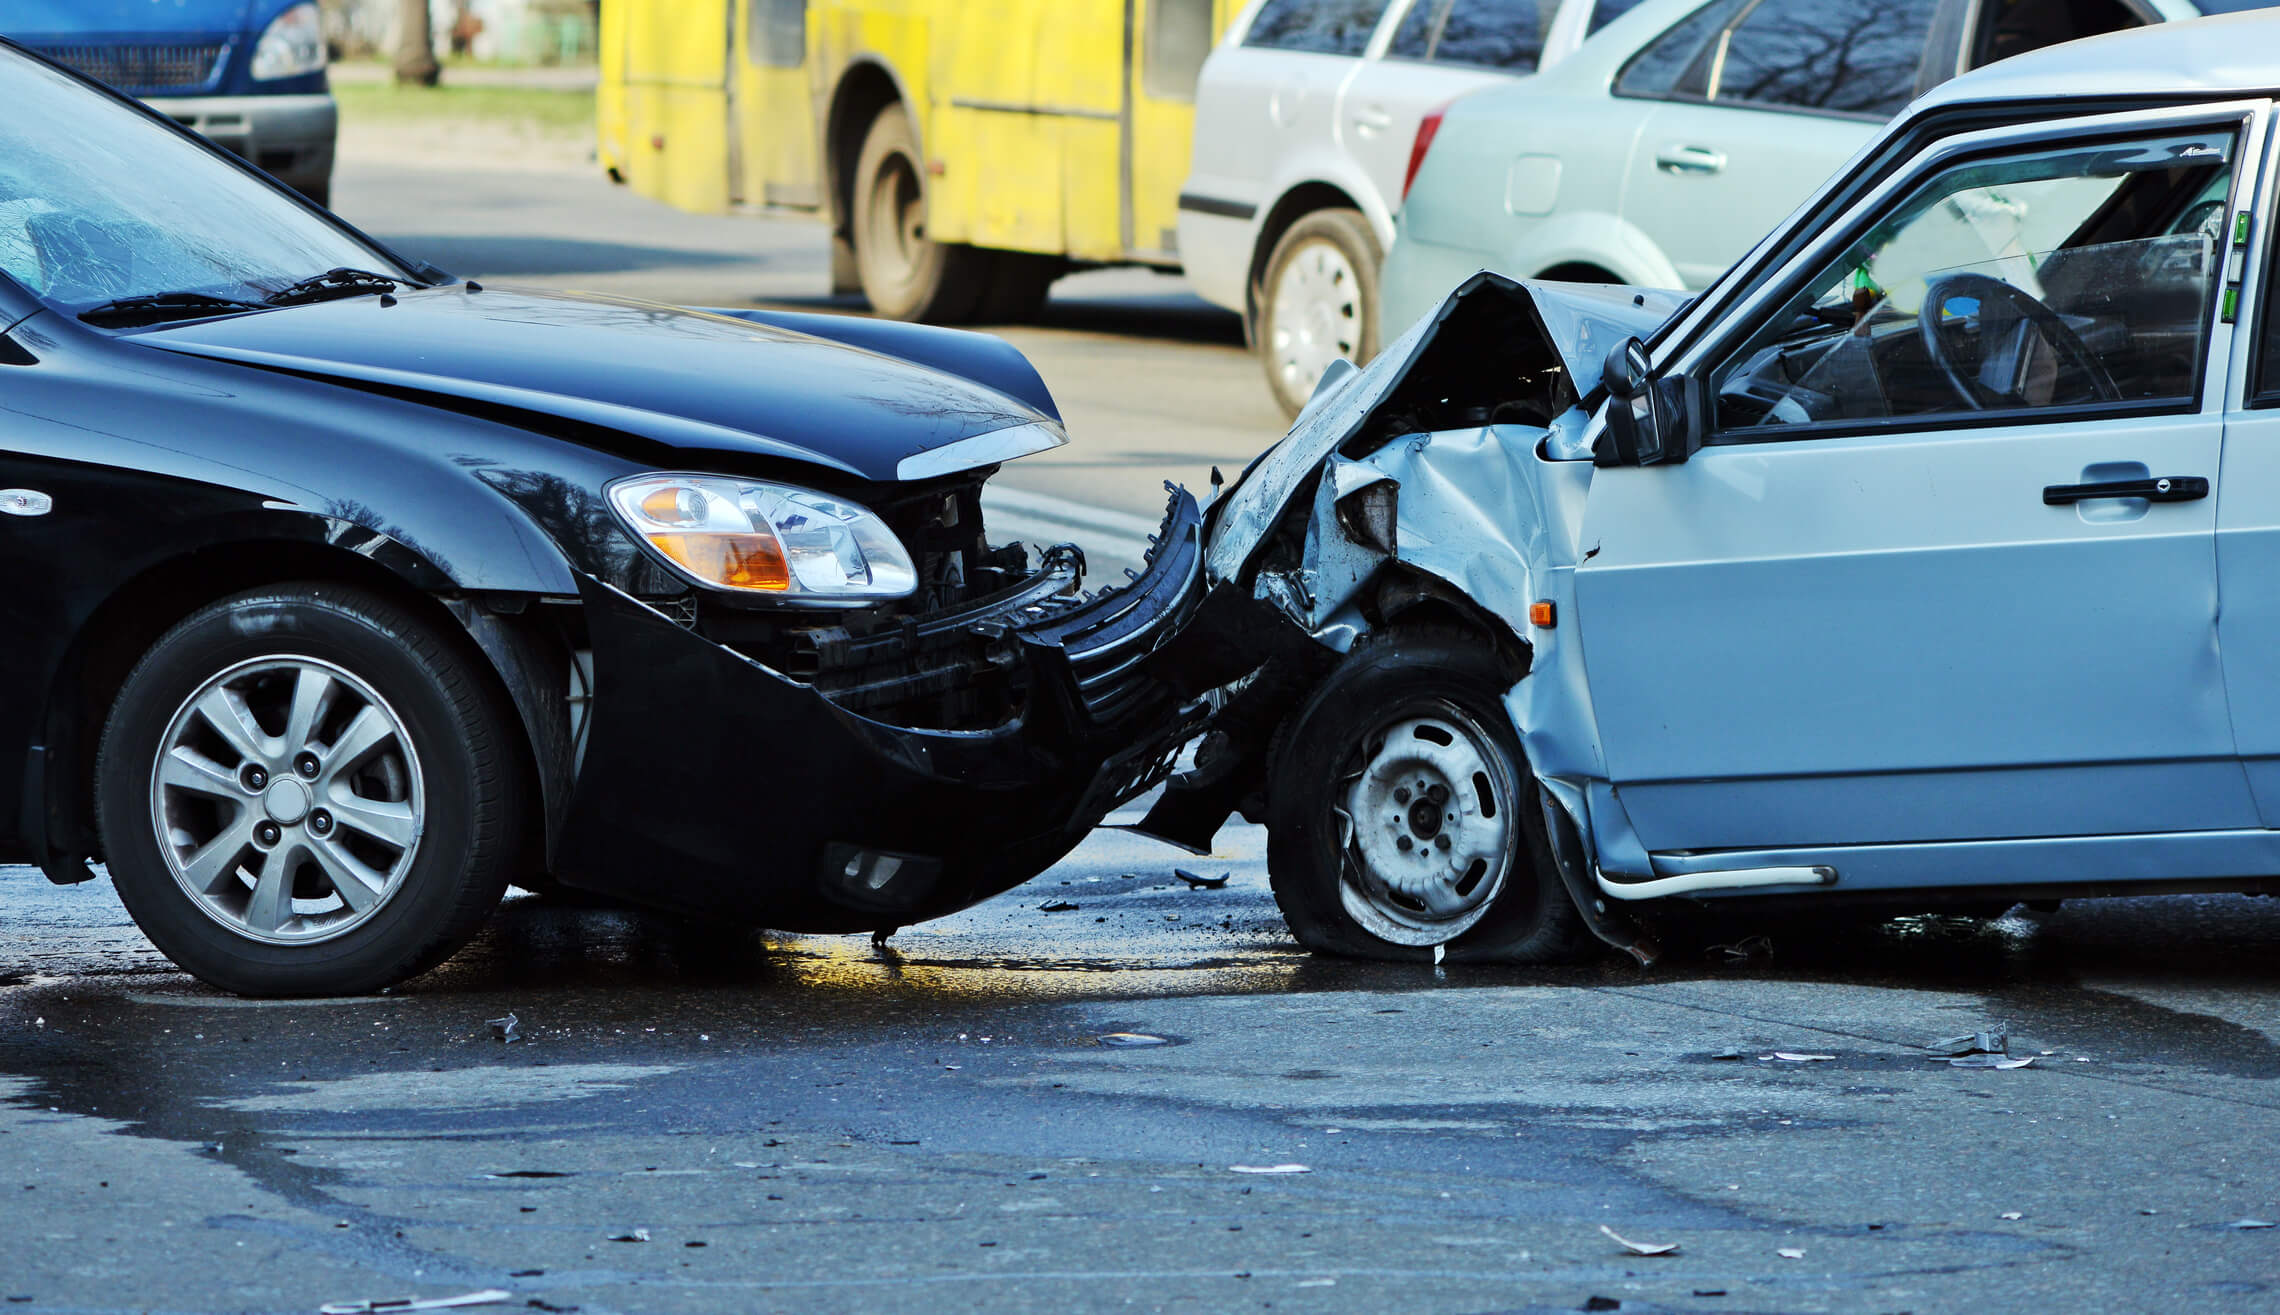 Important Notes About Statutes of Limitations After An Accident